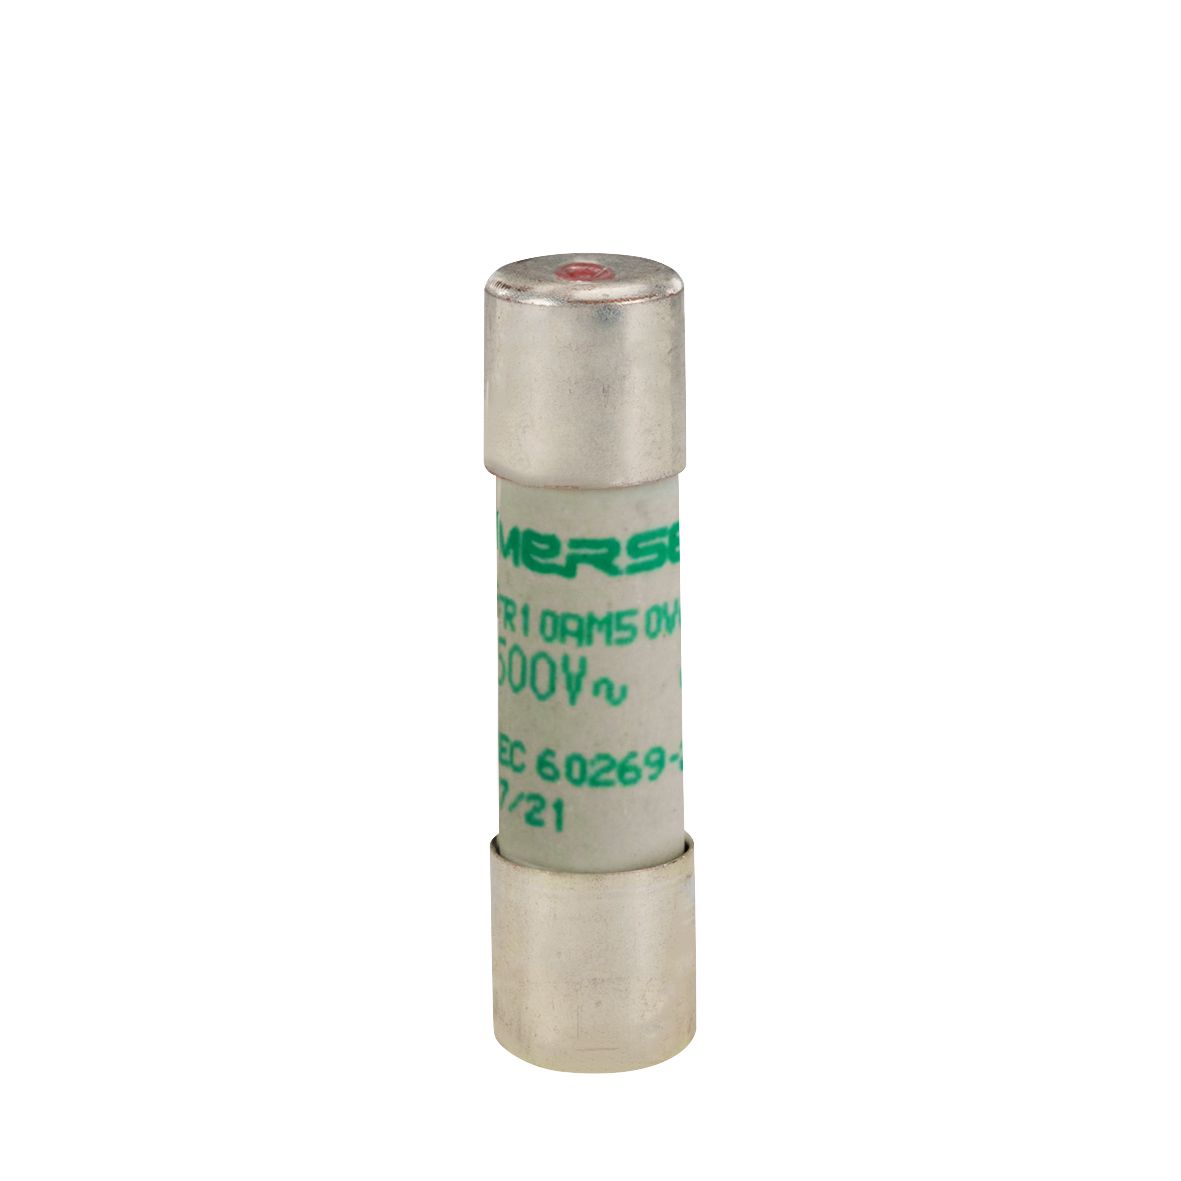 X219233 - Cylindrical fuse-link aM 500VAC 10.3x38, 1A with indicator